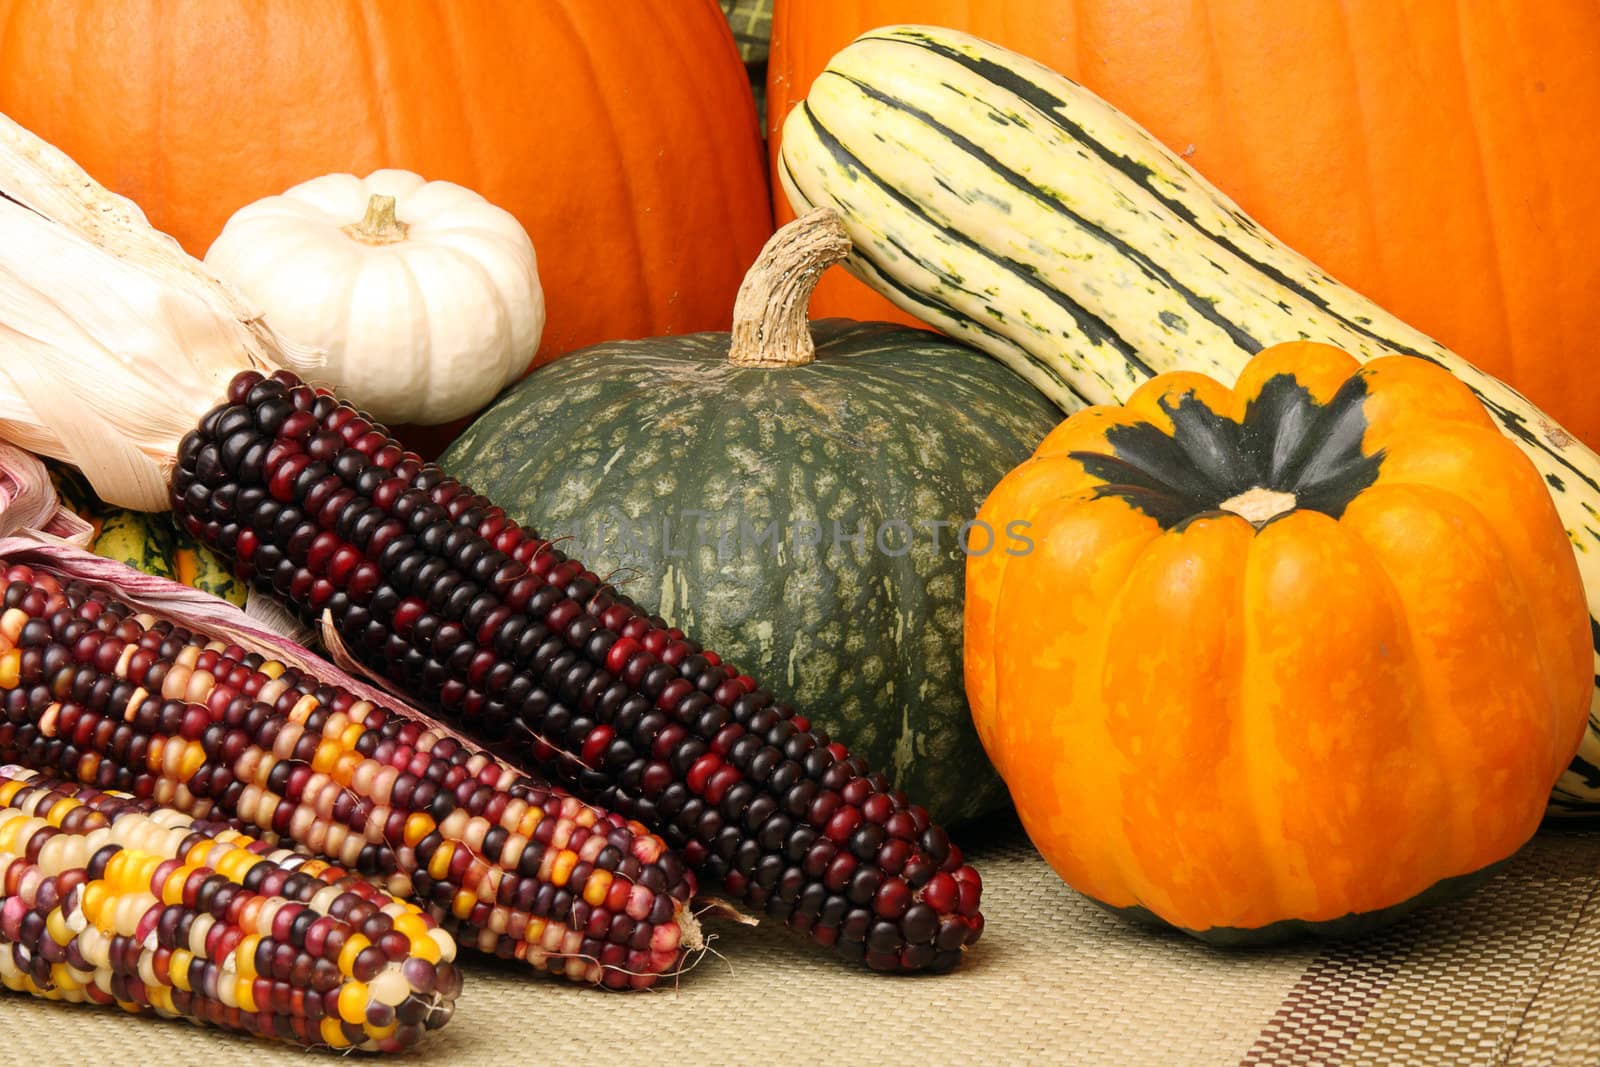 Autumn scene with pumpkins, corn, and colorful squash by svanblar